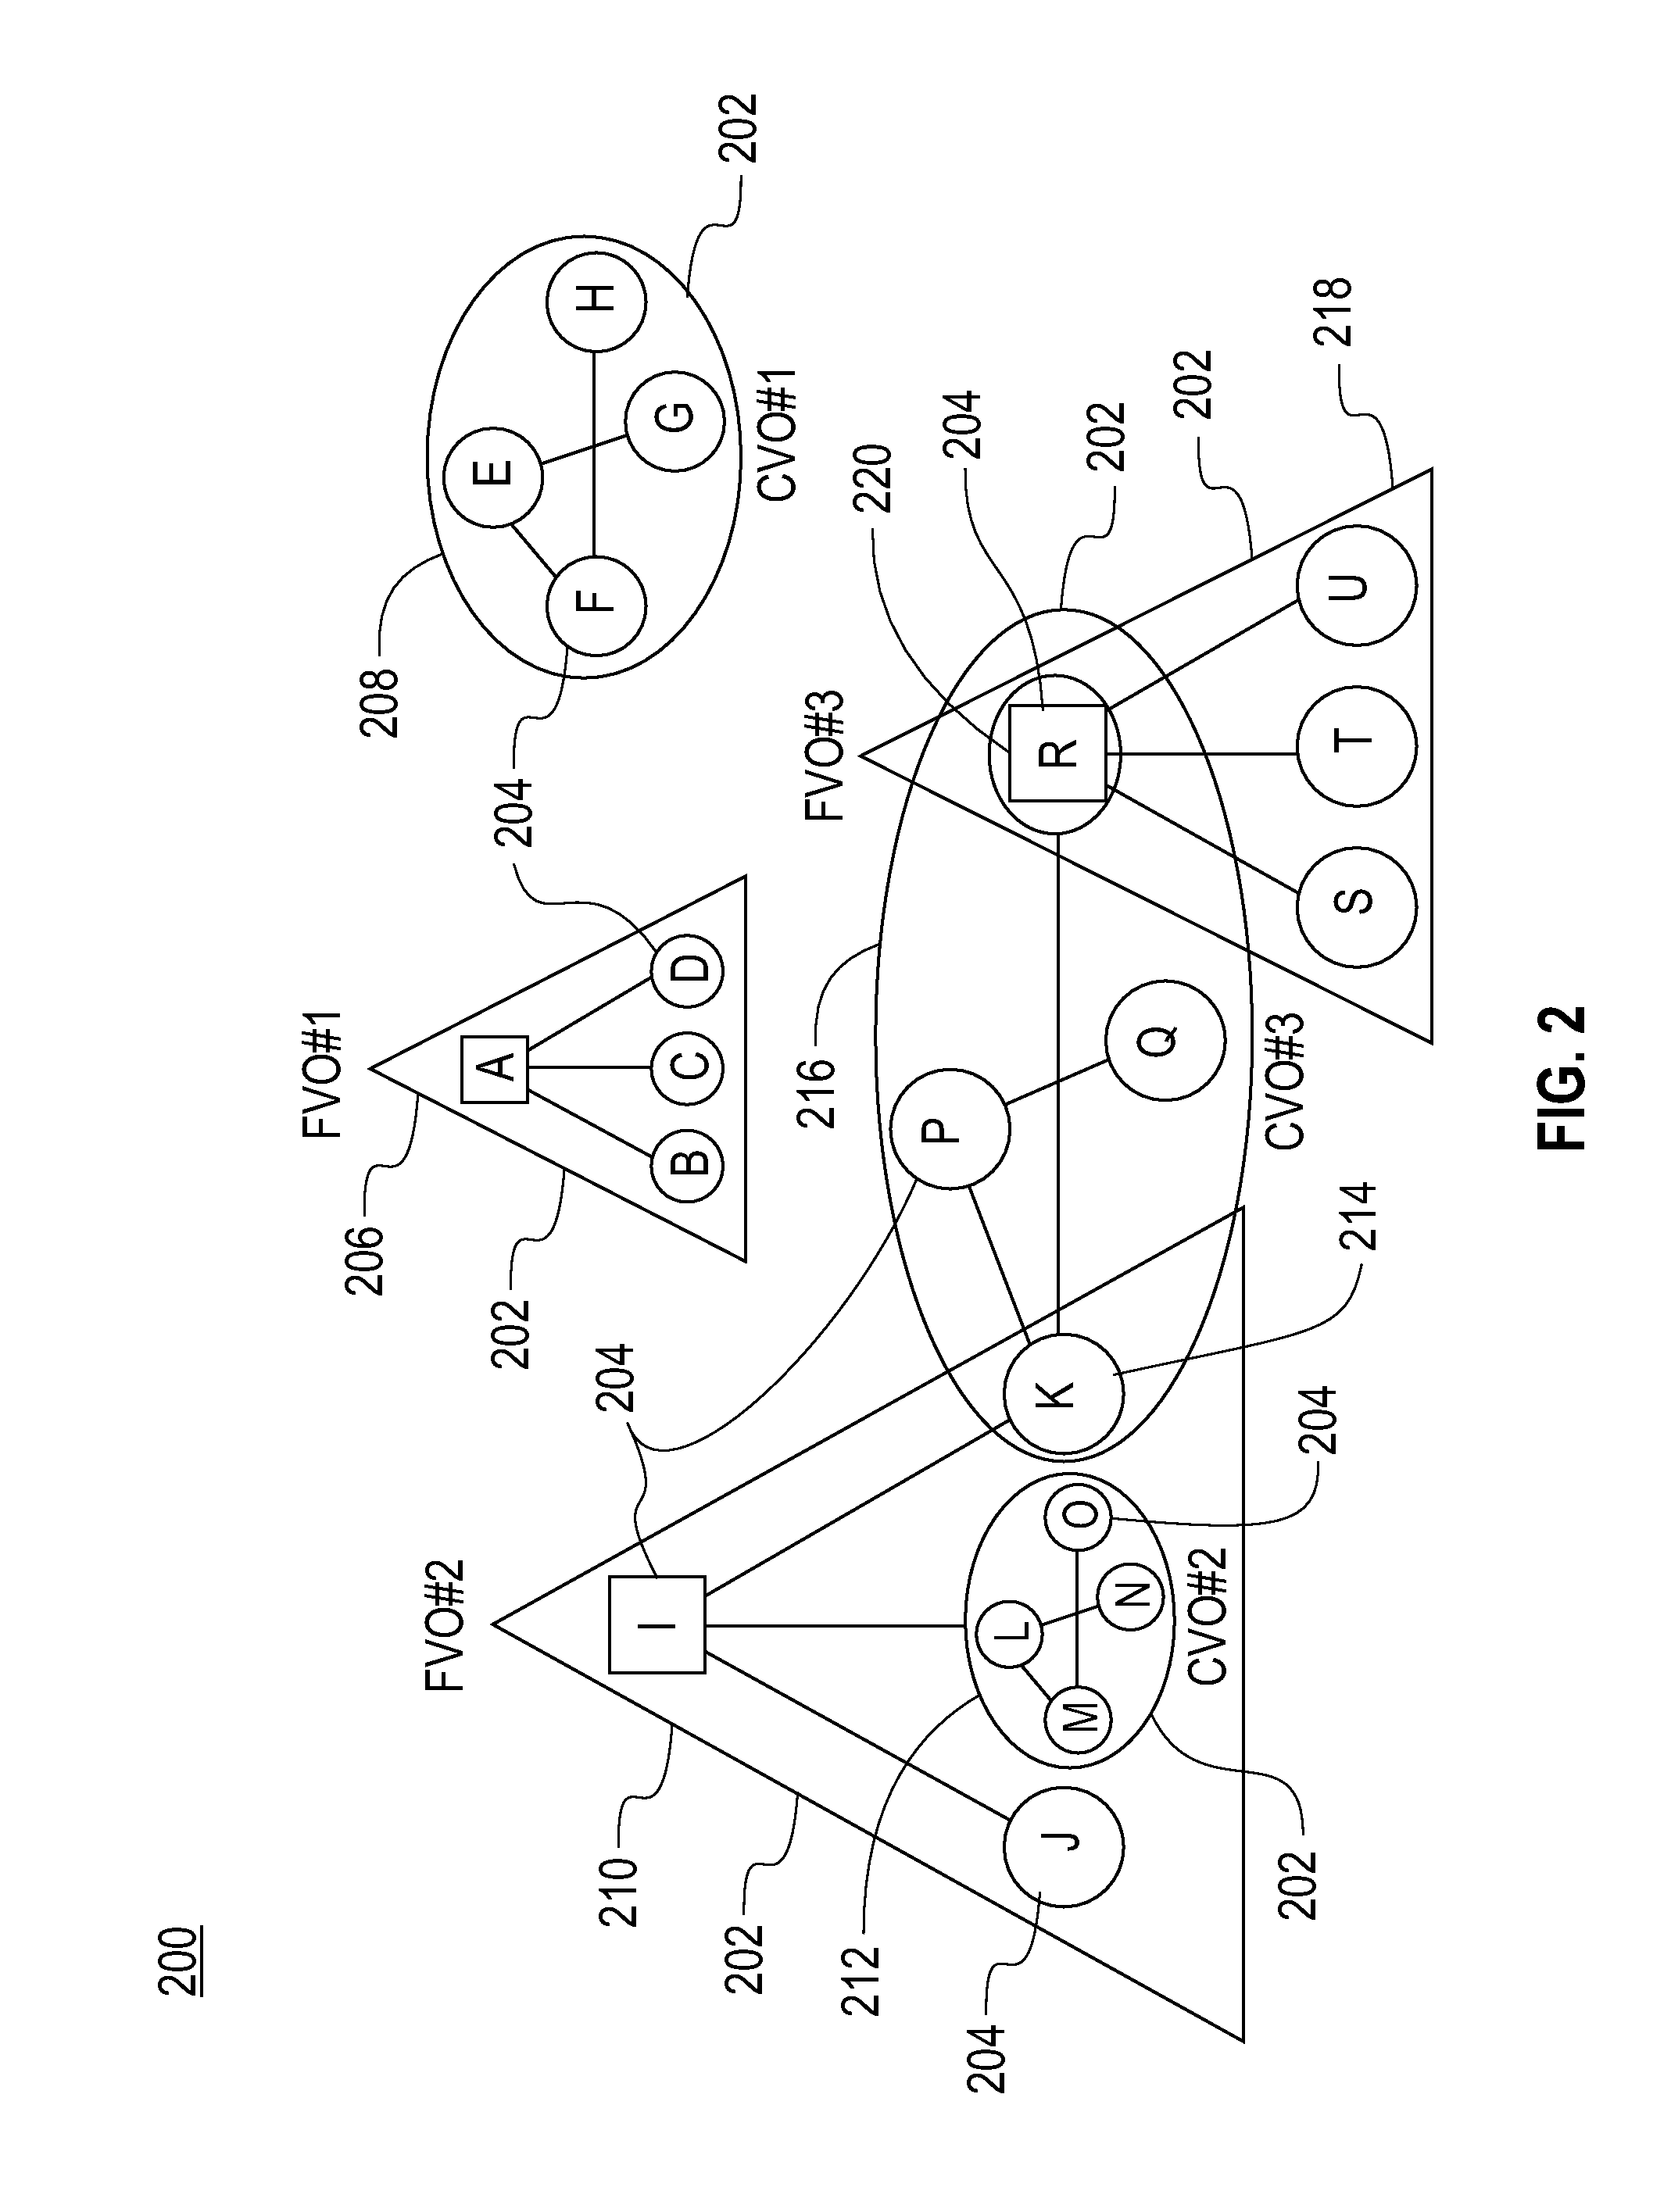 Mechanism for Recovery from Site Failure in a Stream Processing System